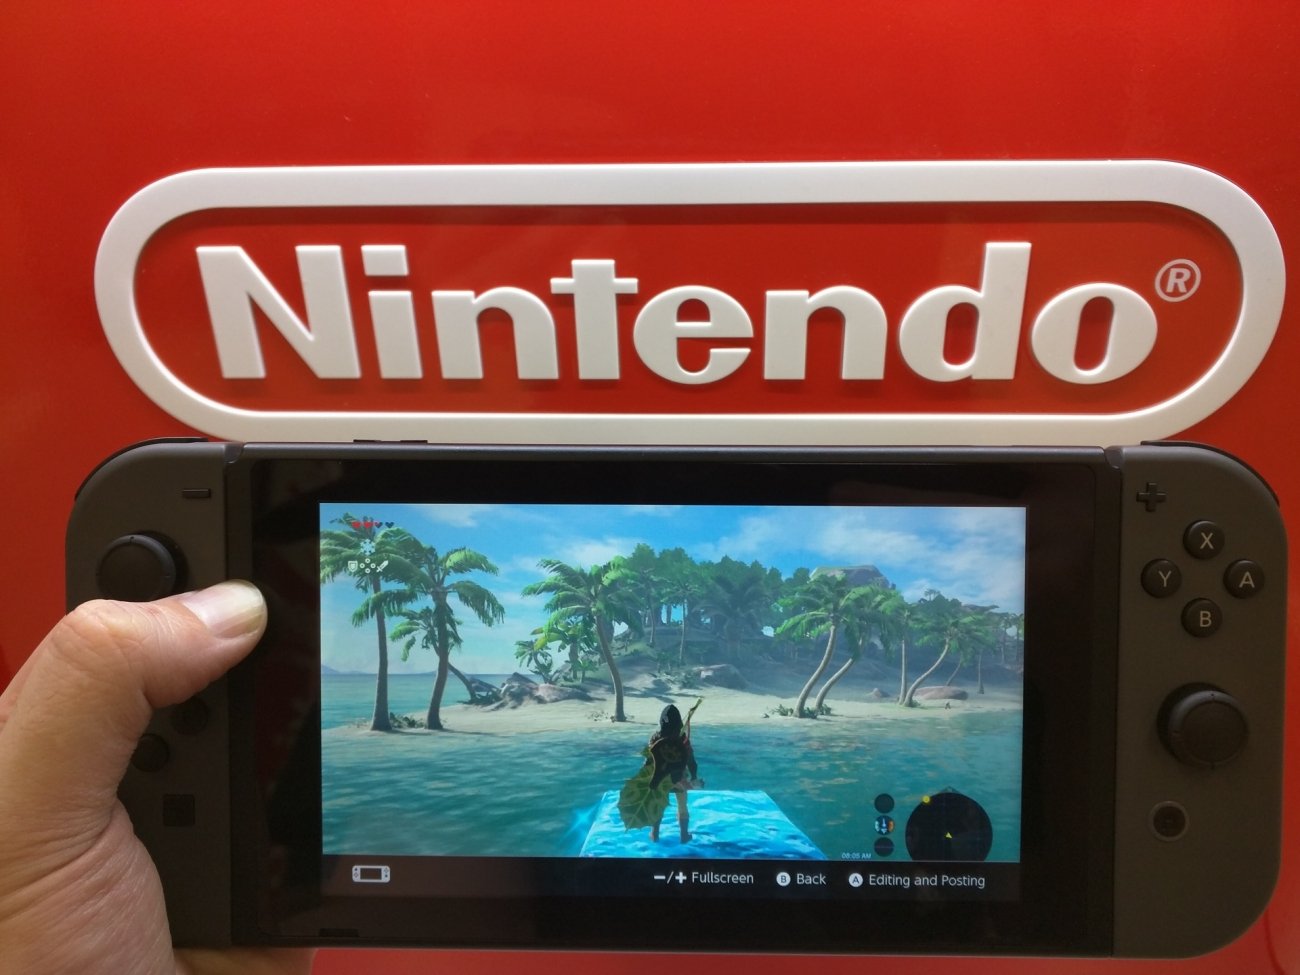 nintendo switch for $199